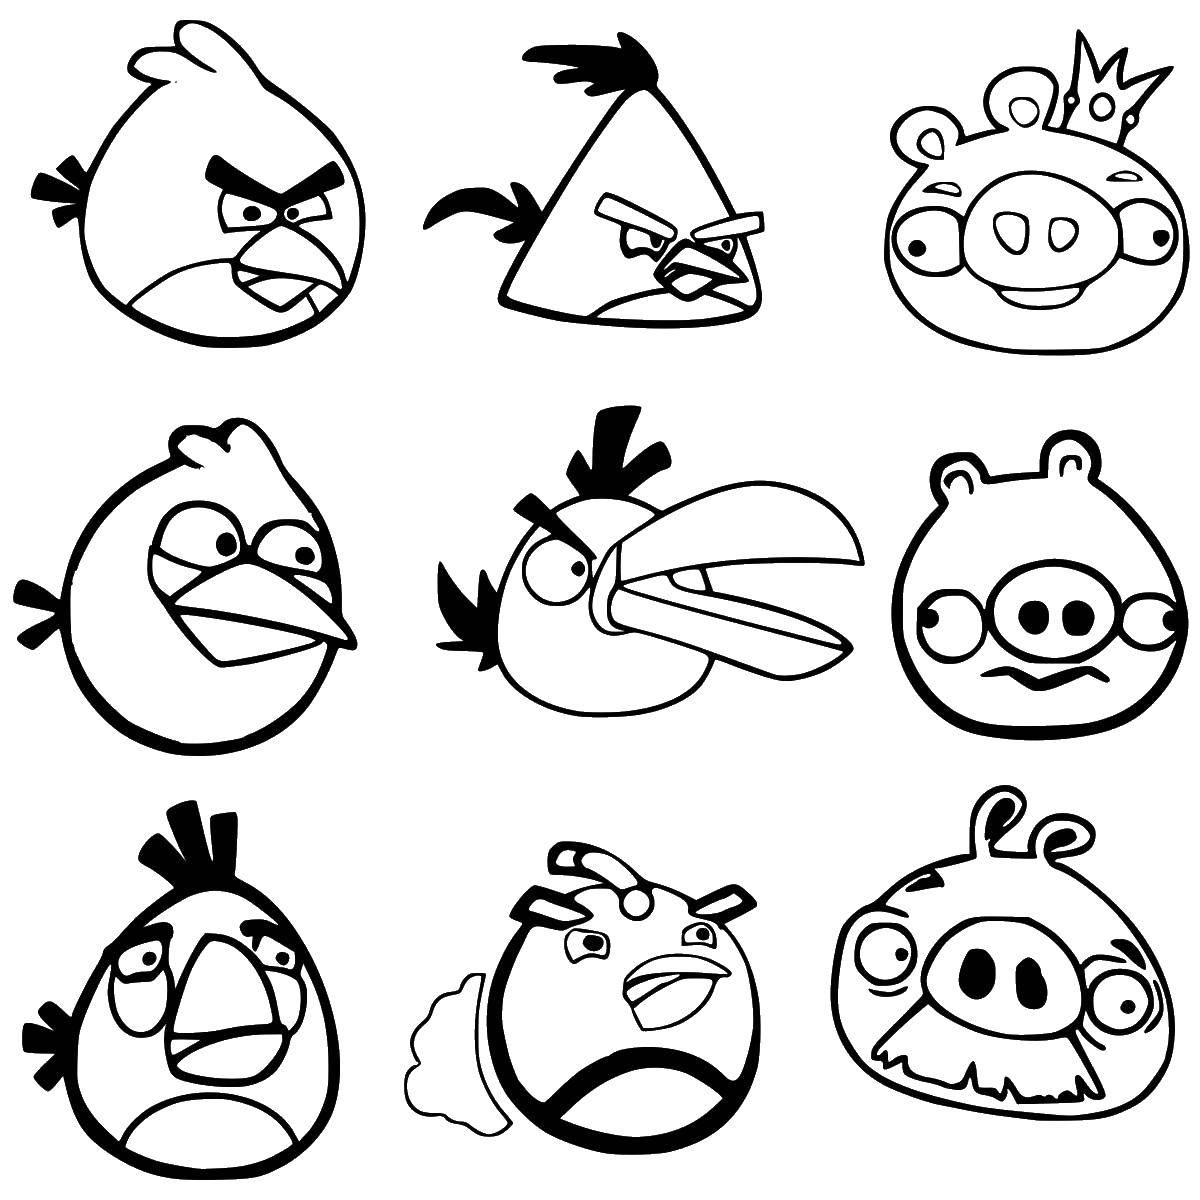 Coloring Birds and pigs from angry birds. Category angry birds. Tags:  angry birds, pig, bird.